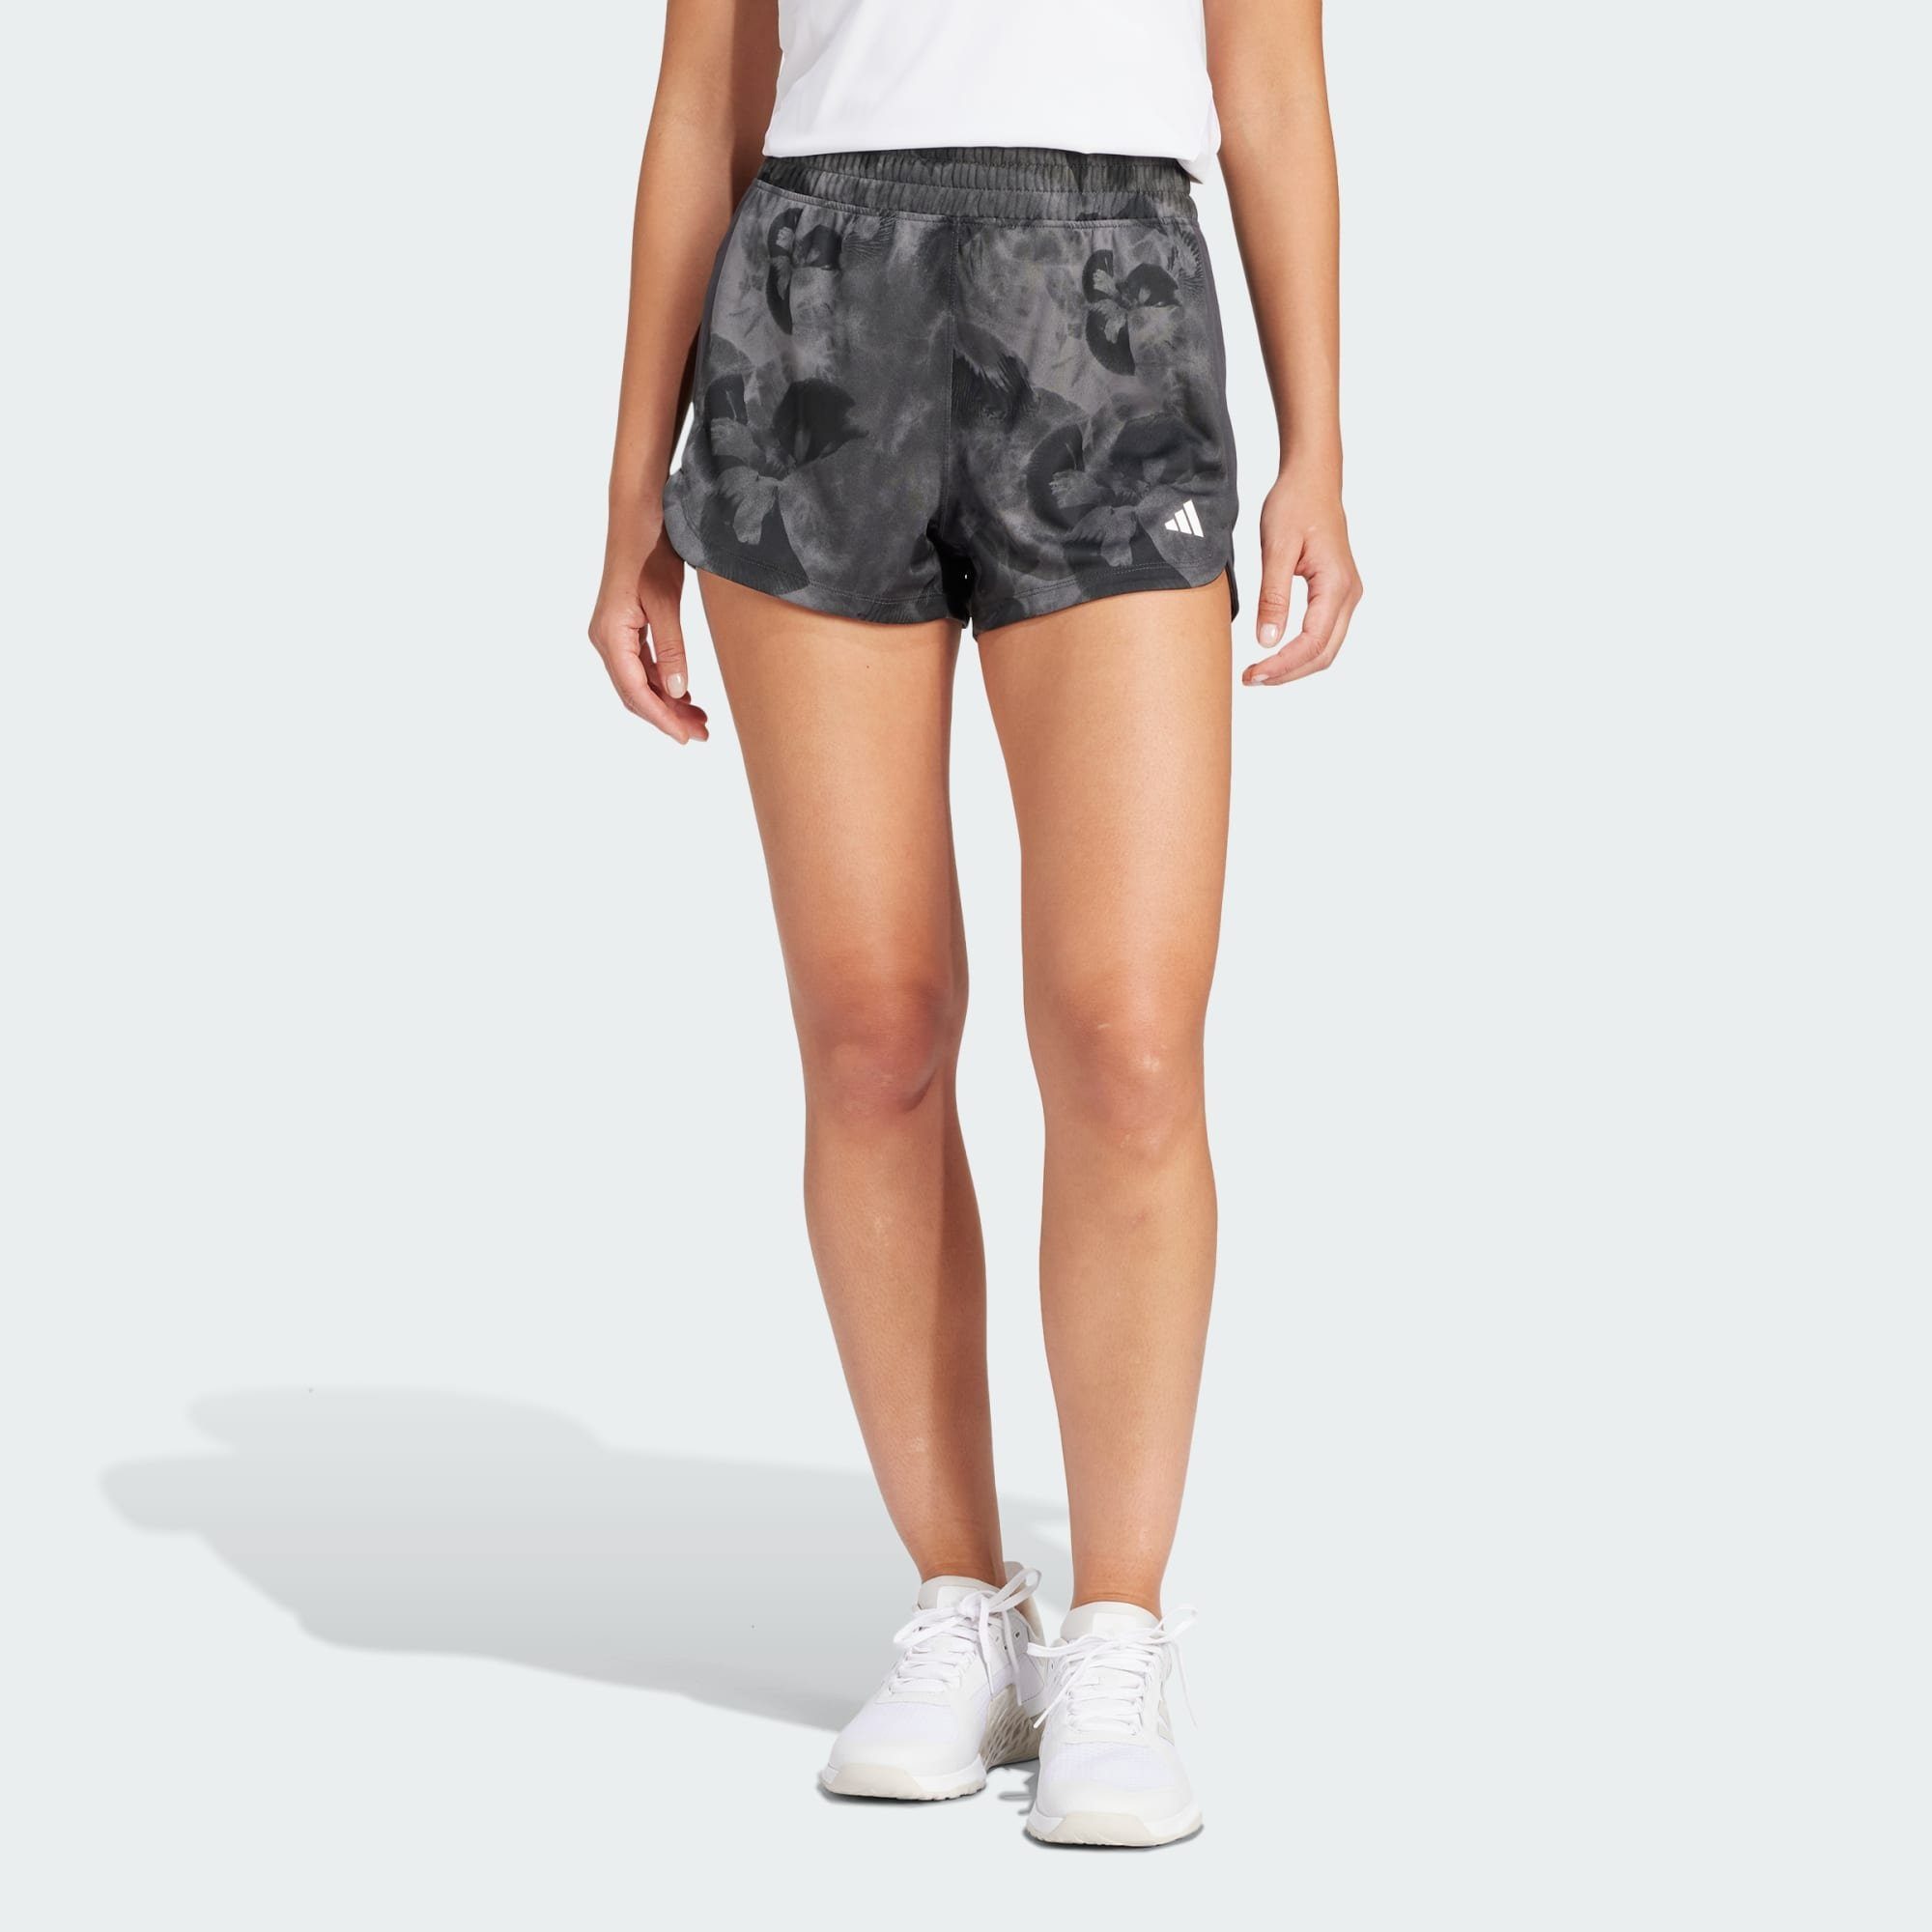 ESSENTIALS Five Grey TIE-DYE KNIT AOP PACER FLOWER Performance SHORTS adidas Funktionsshorts